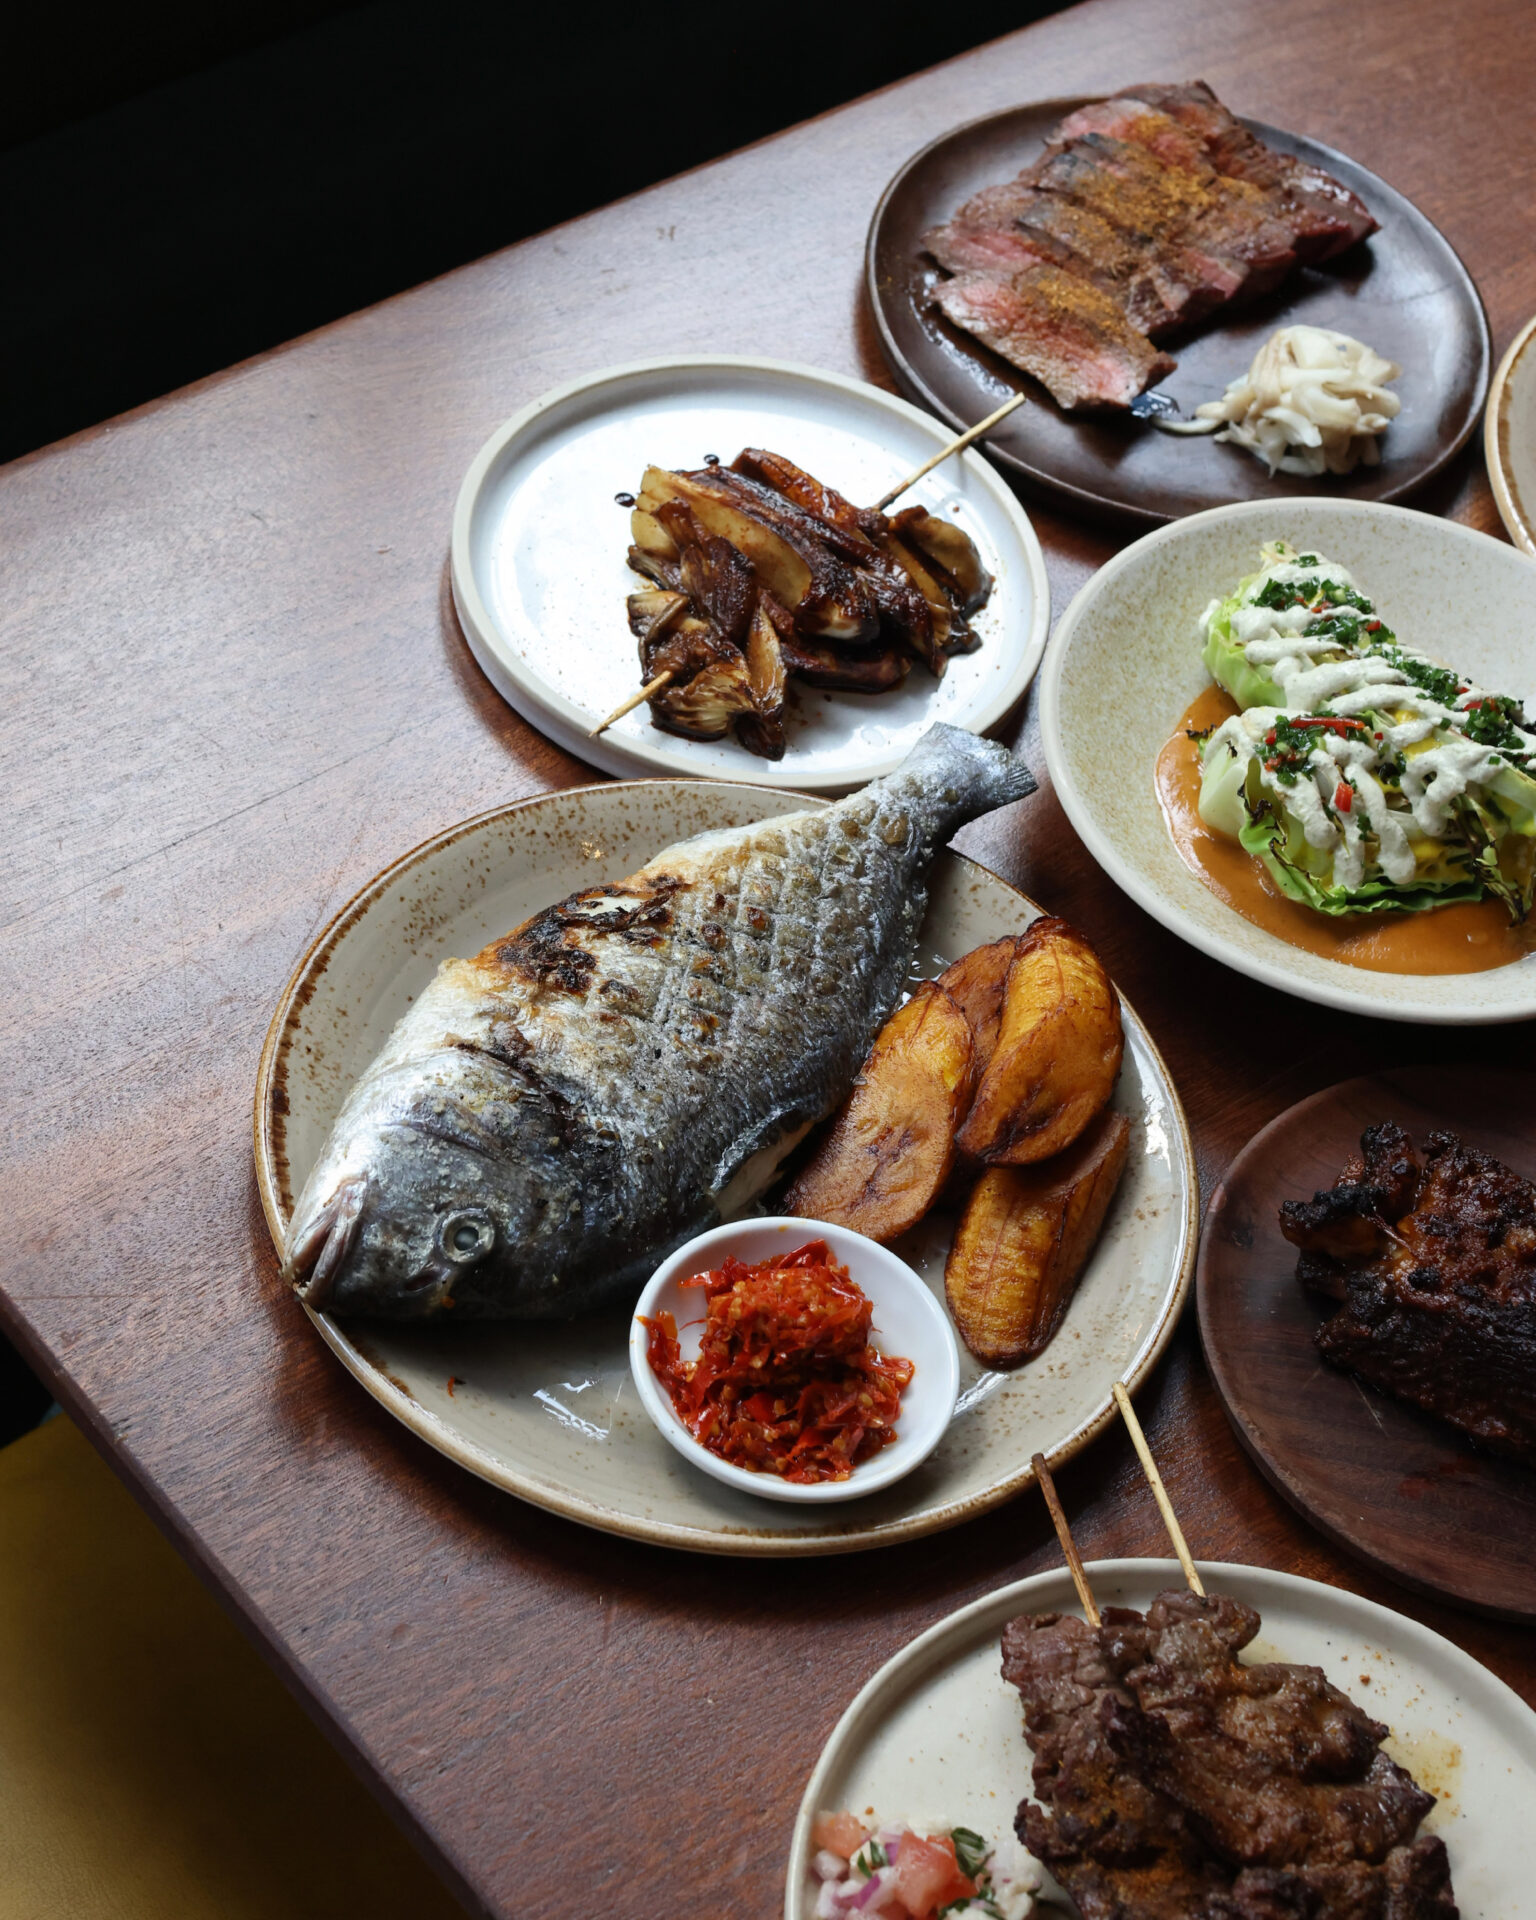 The best restaurants in Brixton, South London | A dark wood tabletop covered in plates of food, including a whole fish dish, and meat skewers, at Chishuru